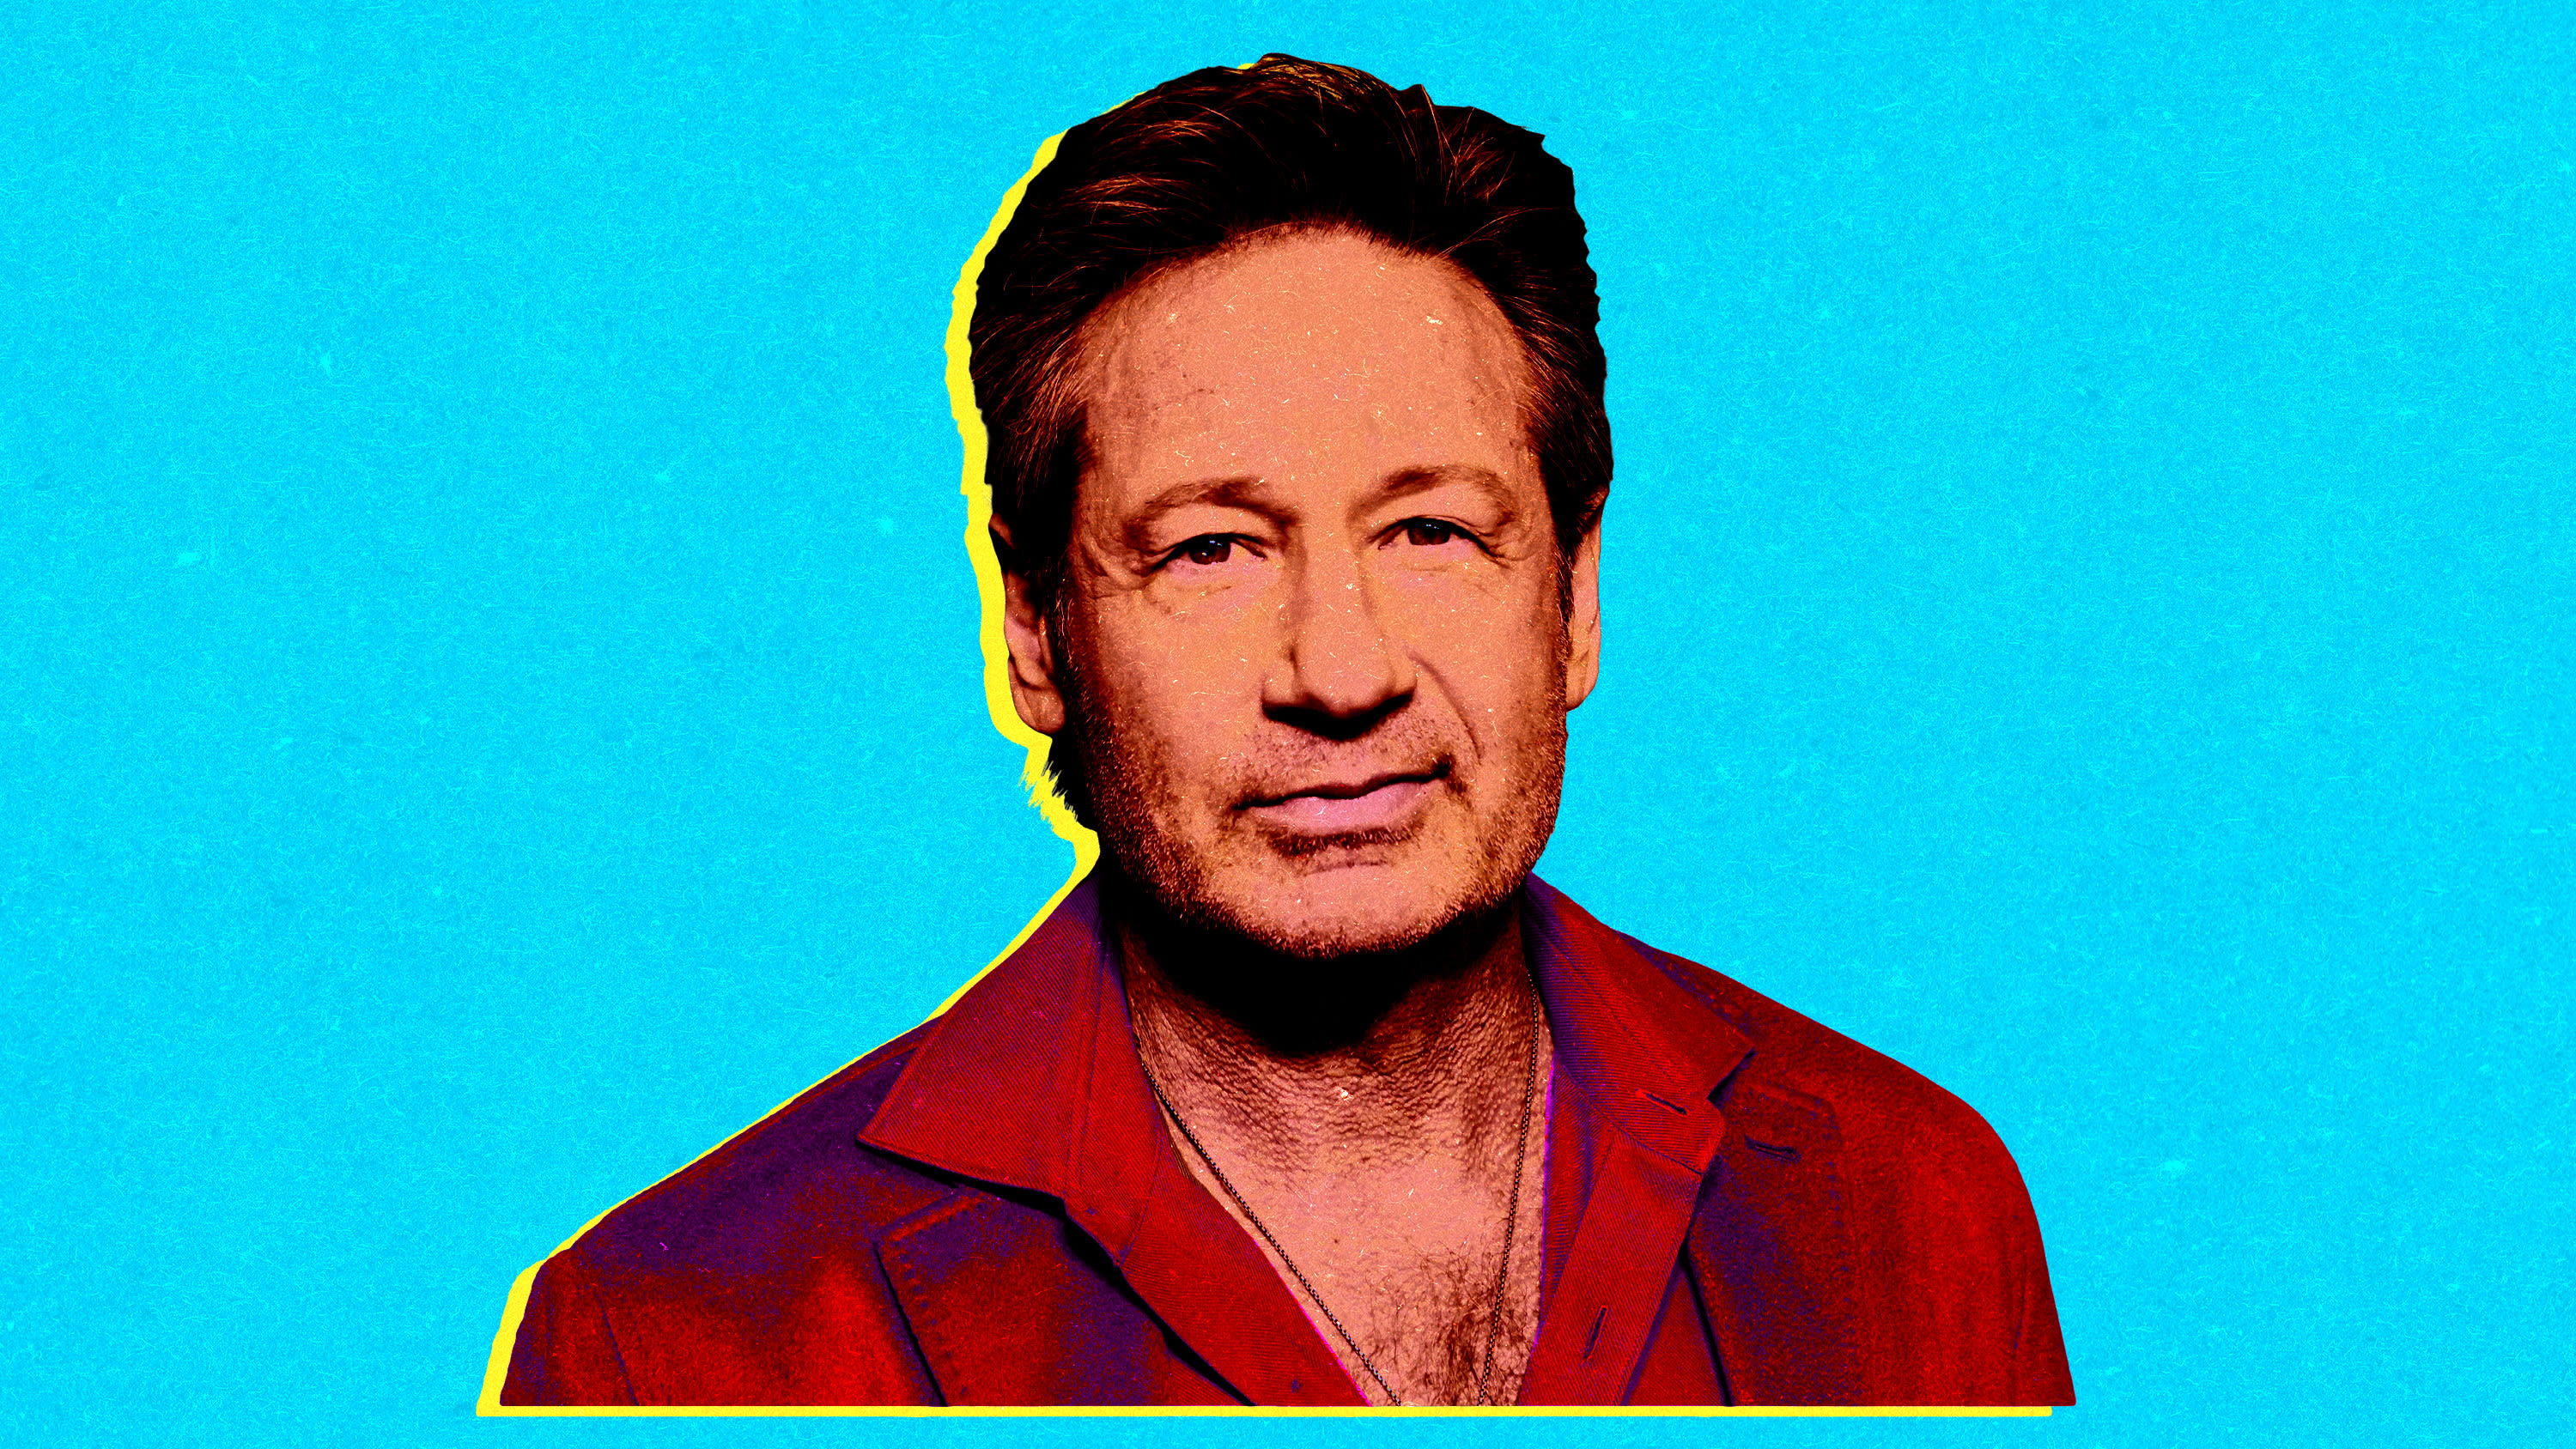 David Duchovny's new podcast is about failure. Here's how he's learned to 'embrace' it.